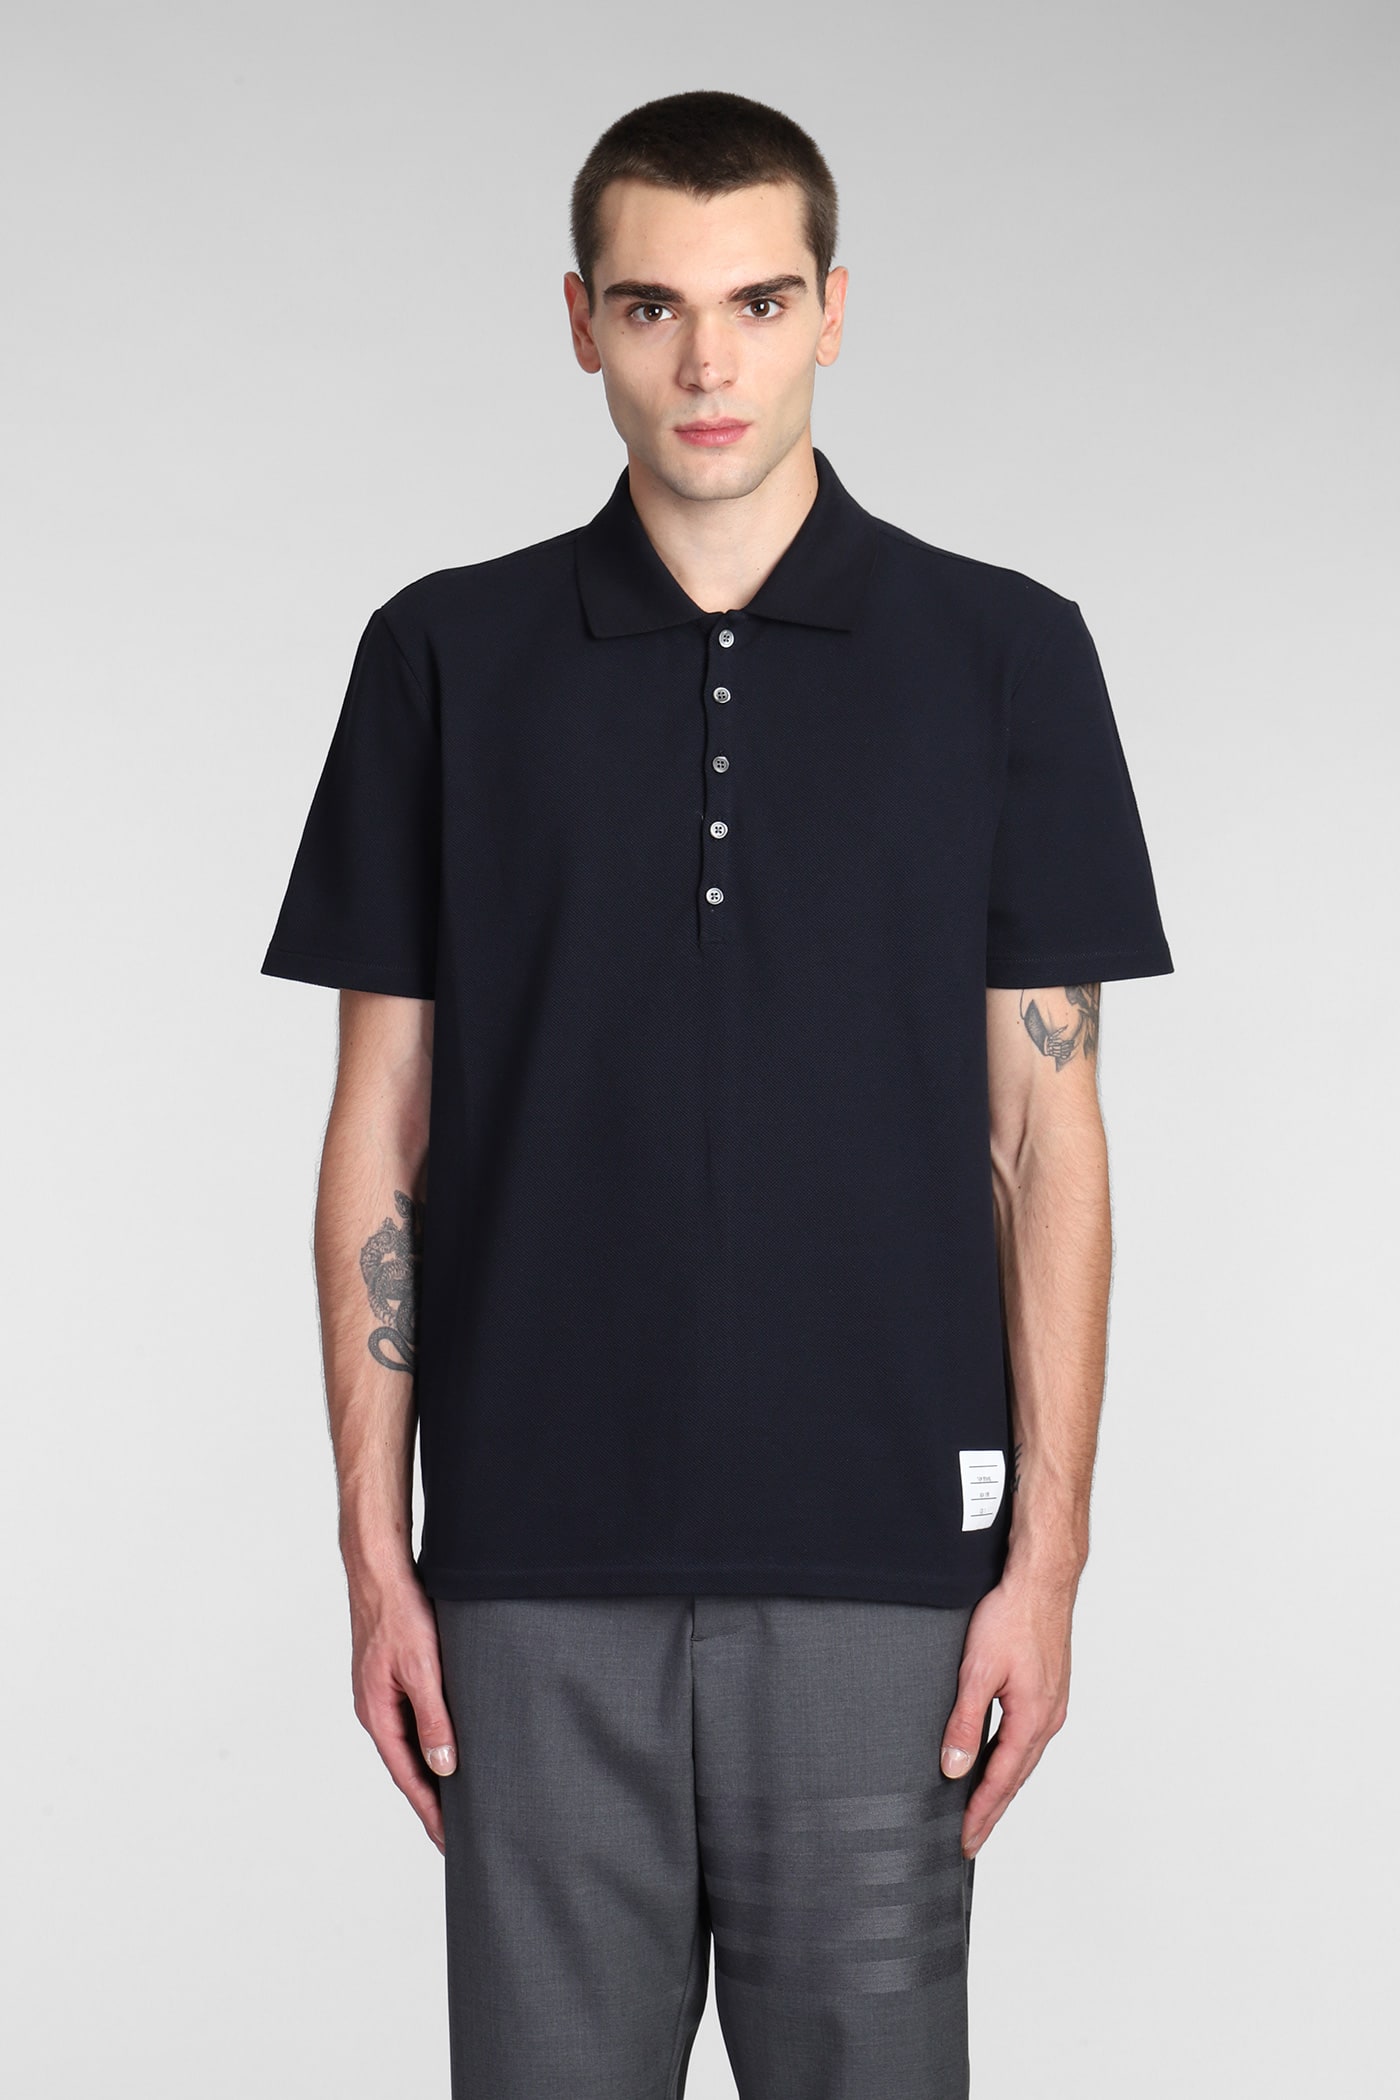 THOM BROWNE POLO IN BLUE COTTON